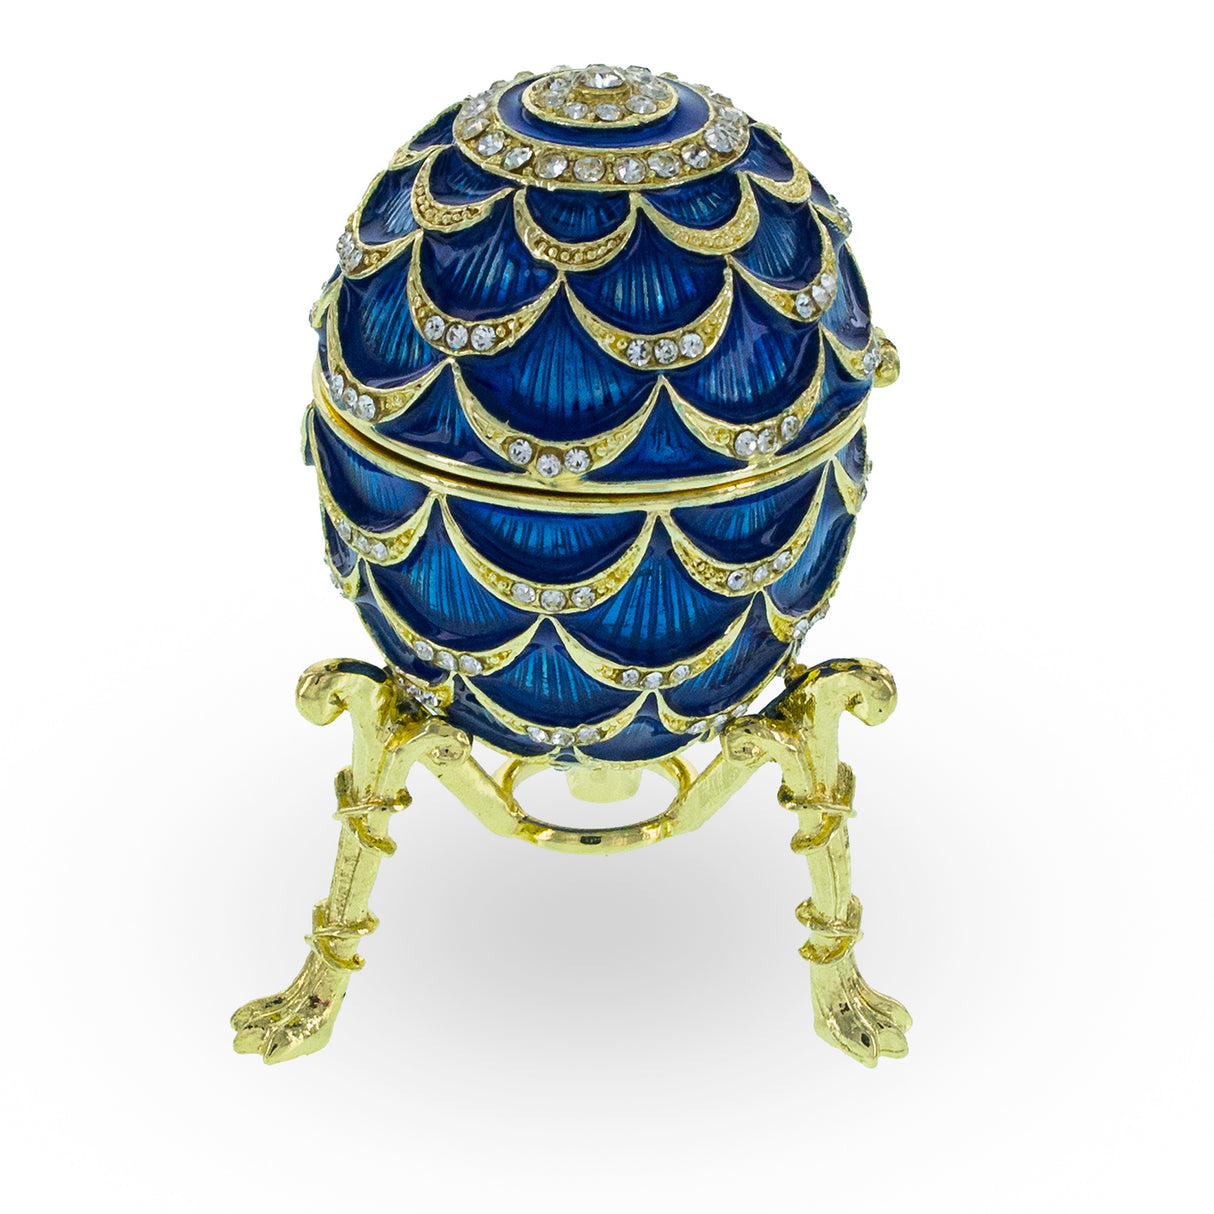 Shop Blue Enamel Pinecone Royal Inspired Imperial Easter Egg with Clock. Buy Blue color Pewter Royal Royal Eggs Inspired for Sale by Online Gift Shop BestPysanky